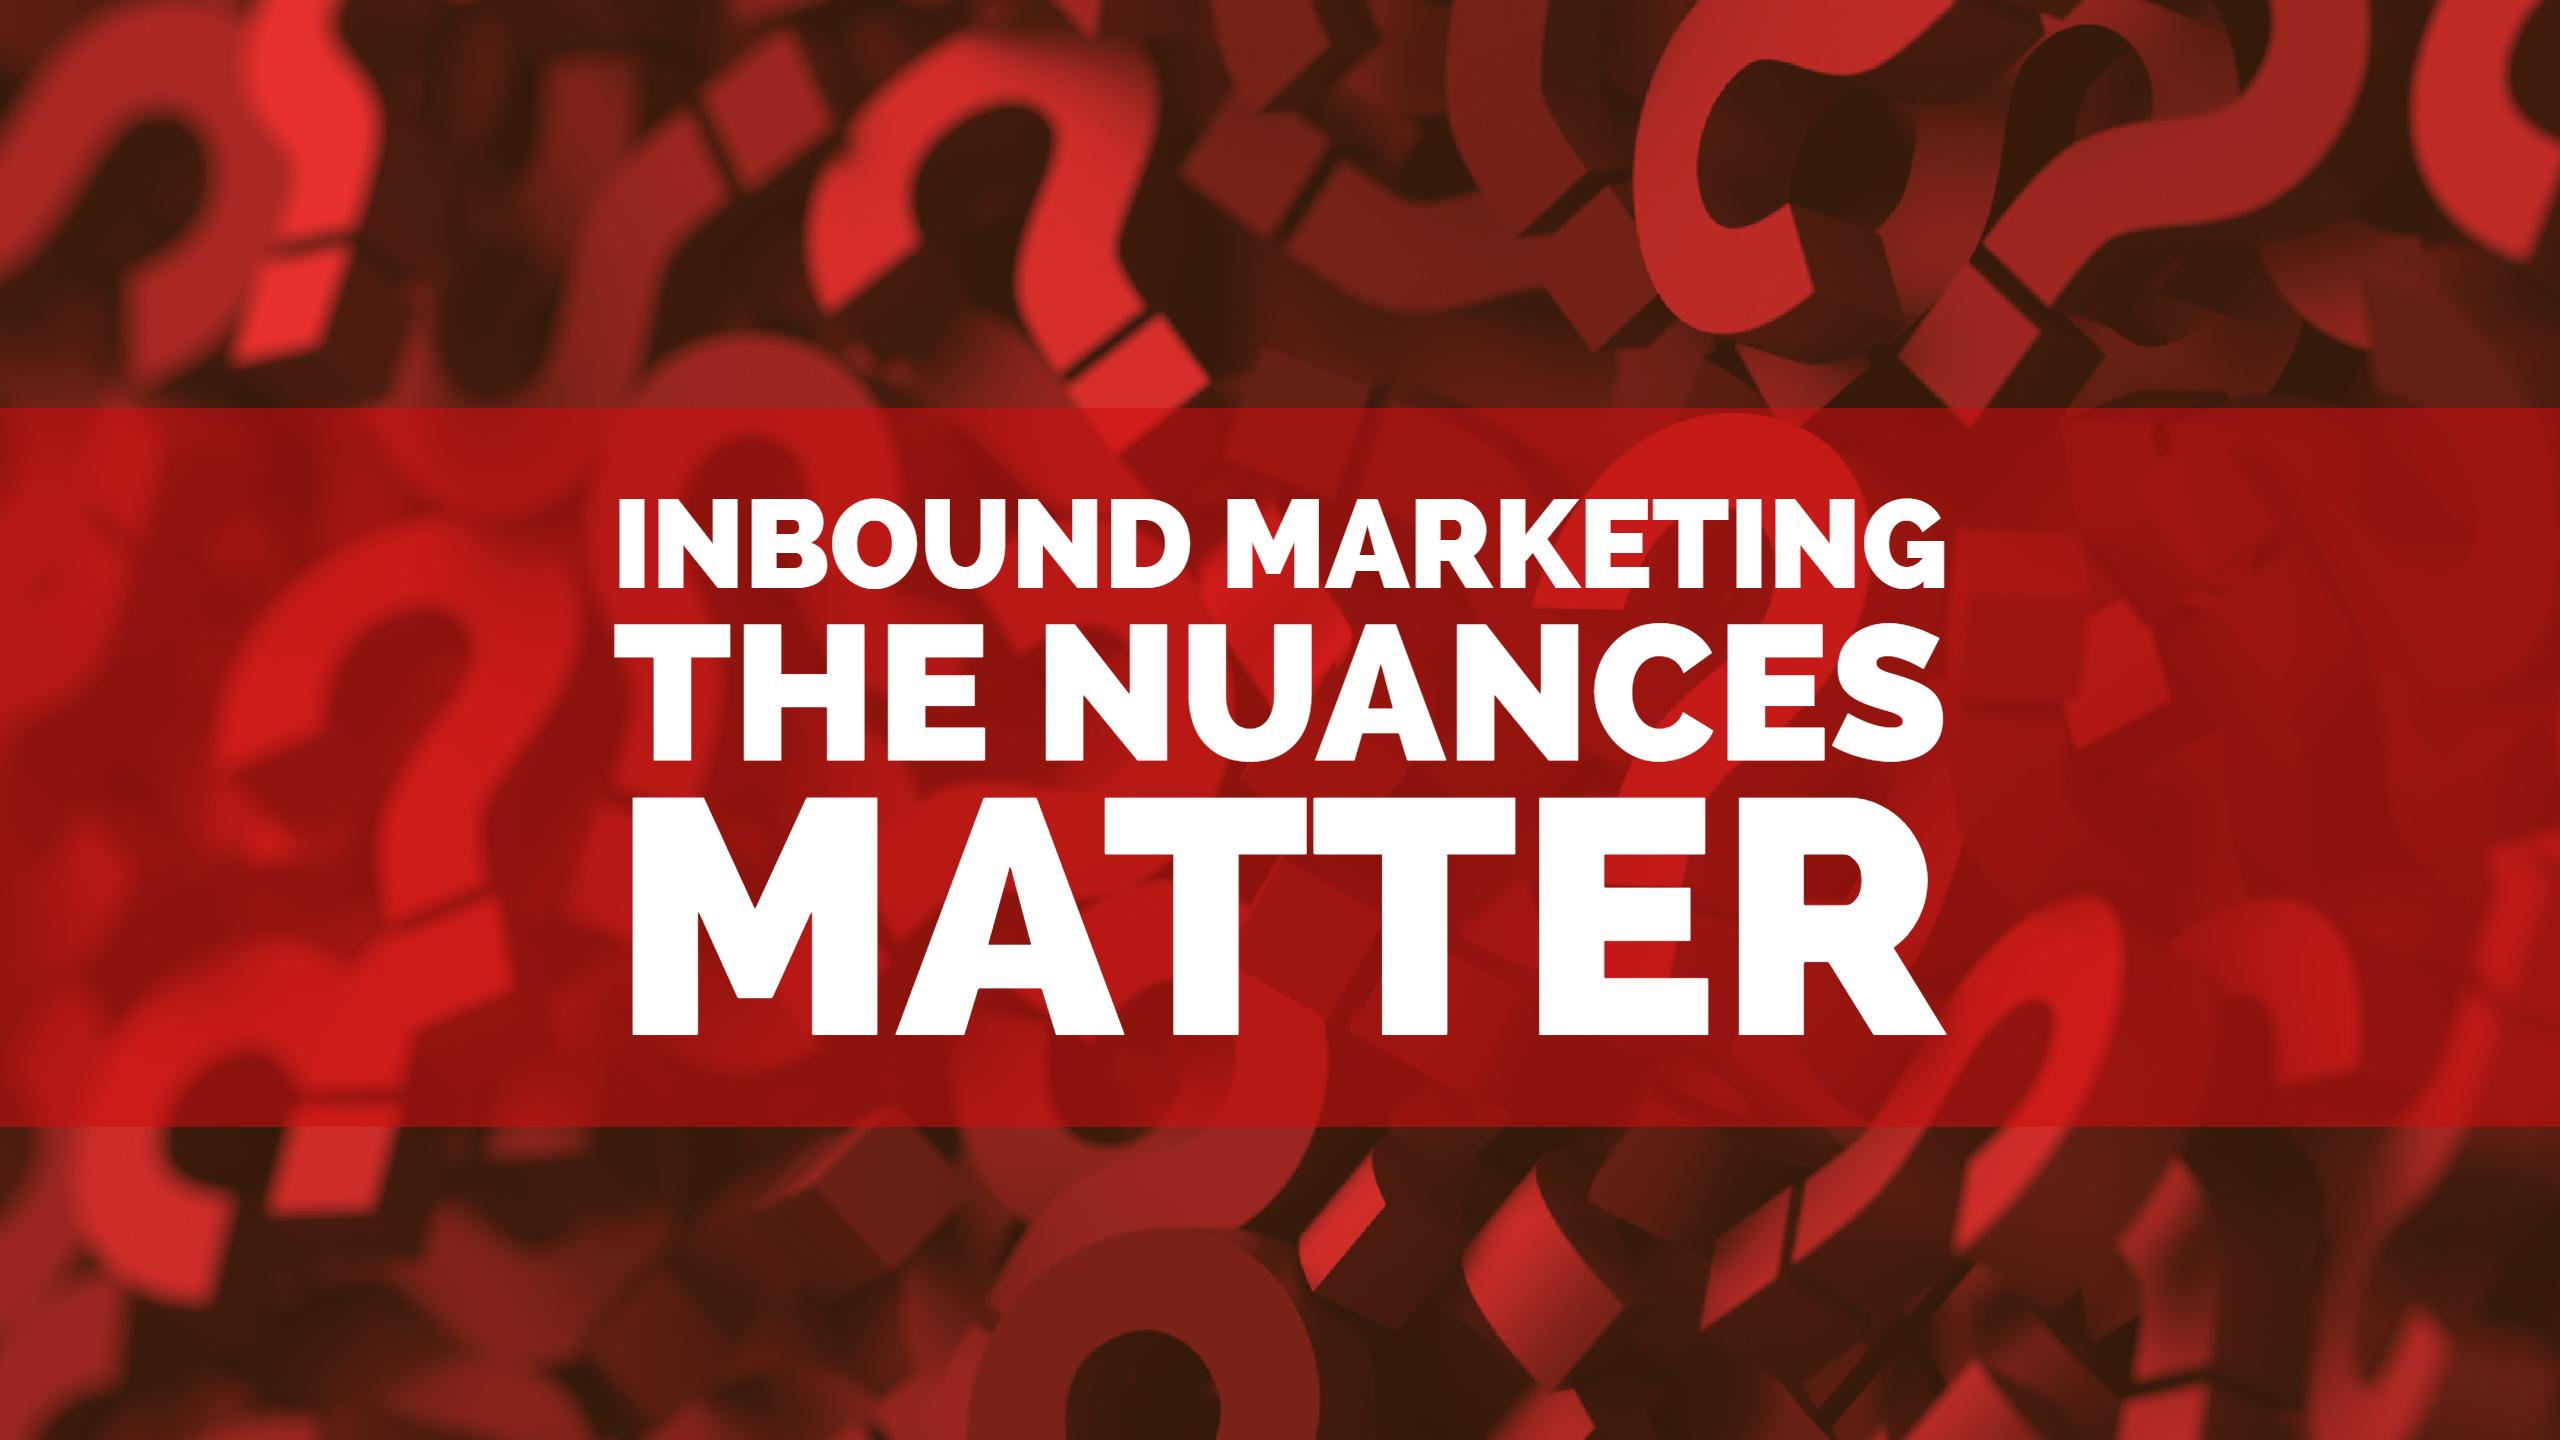 Are You Truly Doing Inbound Marketing?